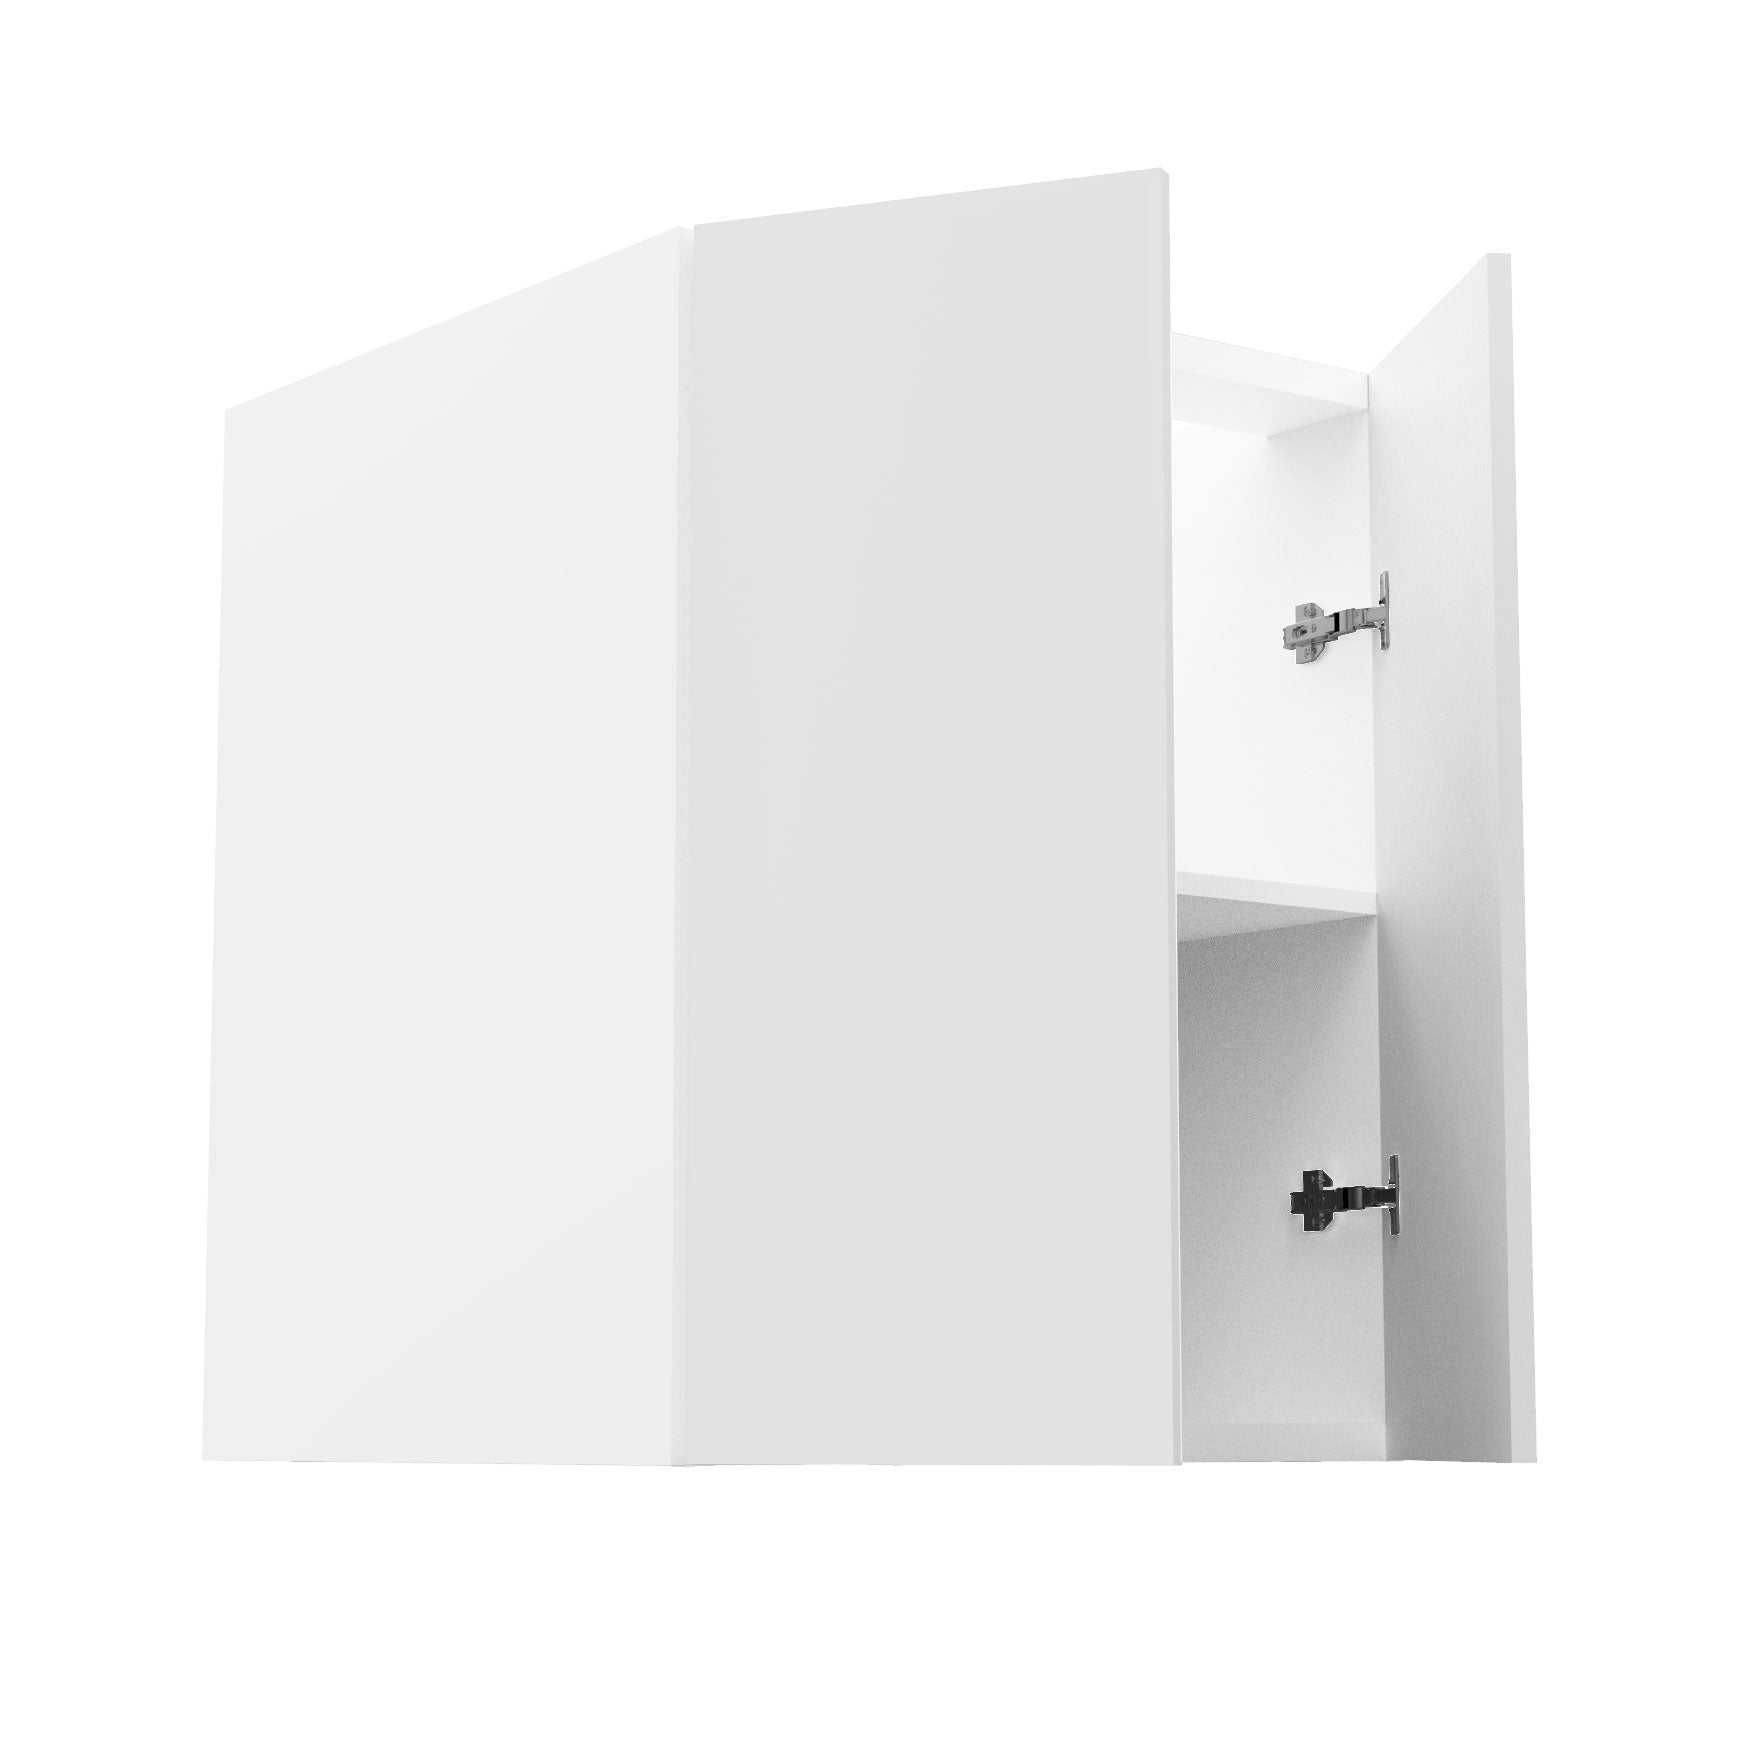 RTA - Glossy White - Full Height Double Door Base Cabinets | 24"W x 30"H x 23.8"D